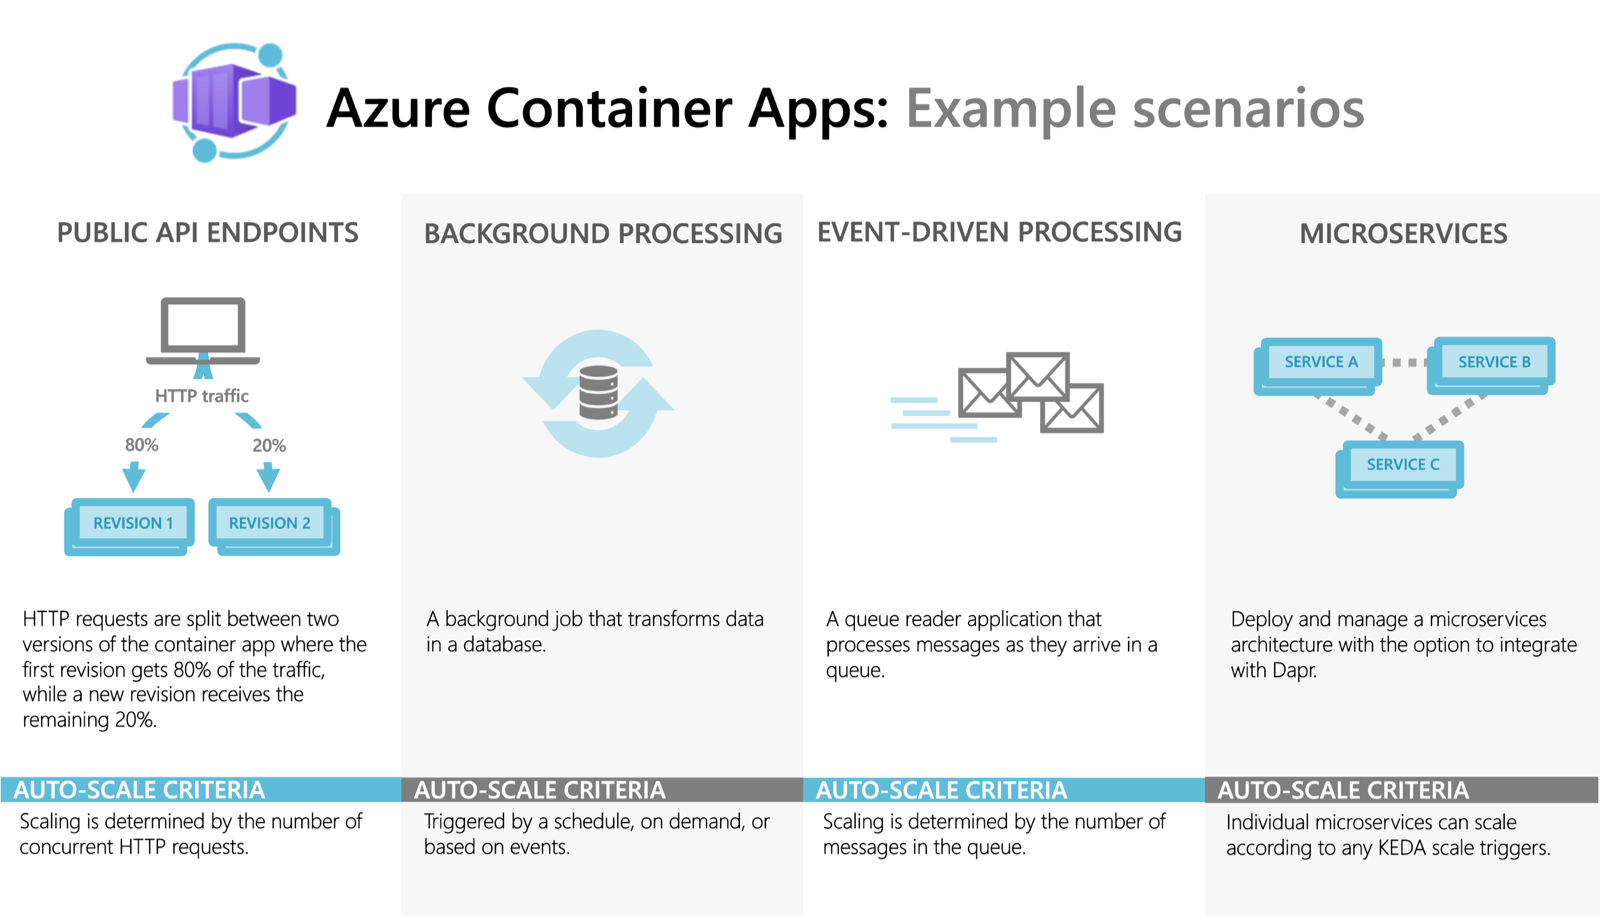 Screenshot showing example scenarios for scaling with Azure Container Apps.